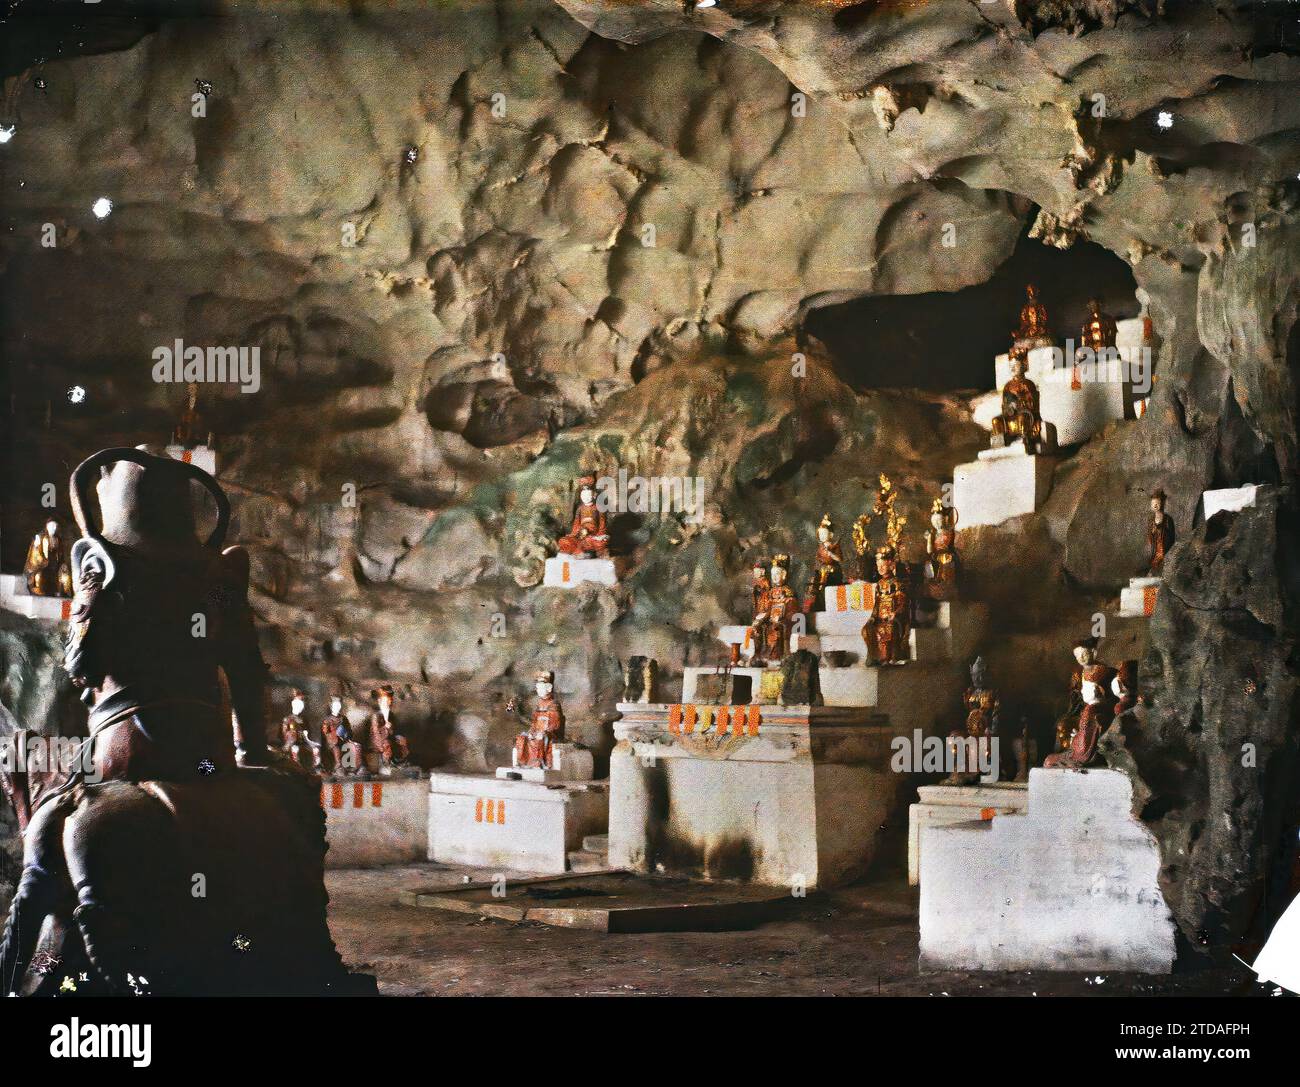 Ky-lu' a, Tonkin, Indochina The main cave of the Rocks of Ky-lu' a, housing a rock sanctuary dedicated to Buddhist worship, Religion, Habitat, Architecture, Art, Sciences, Techniques, Statue, Buddhism, Temple, Erosion, Interior view, Sculpture, Cave, Geology, Indochina, Tonkin, Landscapes, From Hanoi to the Chinese border, The Ky-lua caves, View of the large cave, taken from the bottom, Ky-Lua, 15/04/1916 - 16/04/1916, Busy, Léon, Léon Busy photographer en Indochine, Autochrome, photo, Glass, Autochrome, photo, Positive, Horizontal Stock Photo